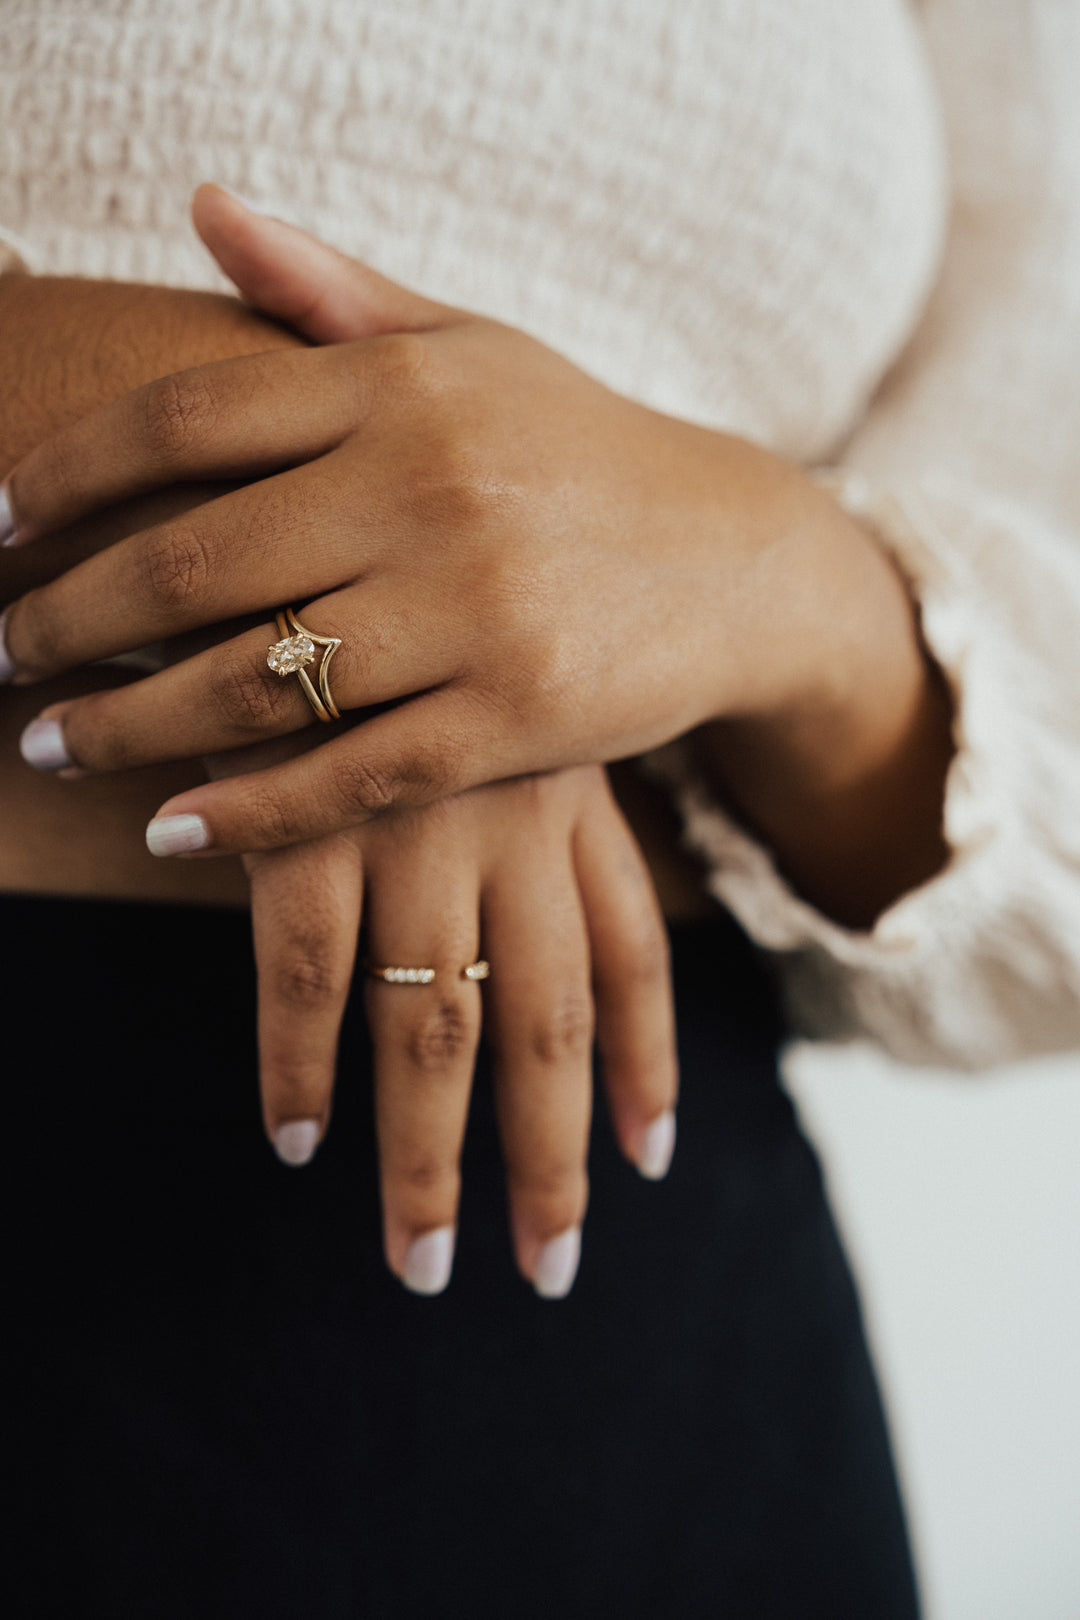 Before & After: Designing a Custom Engagement Ring